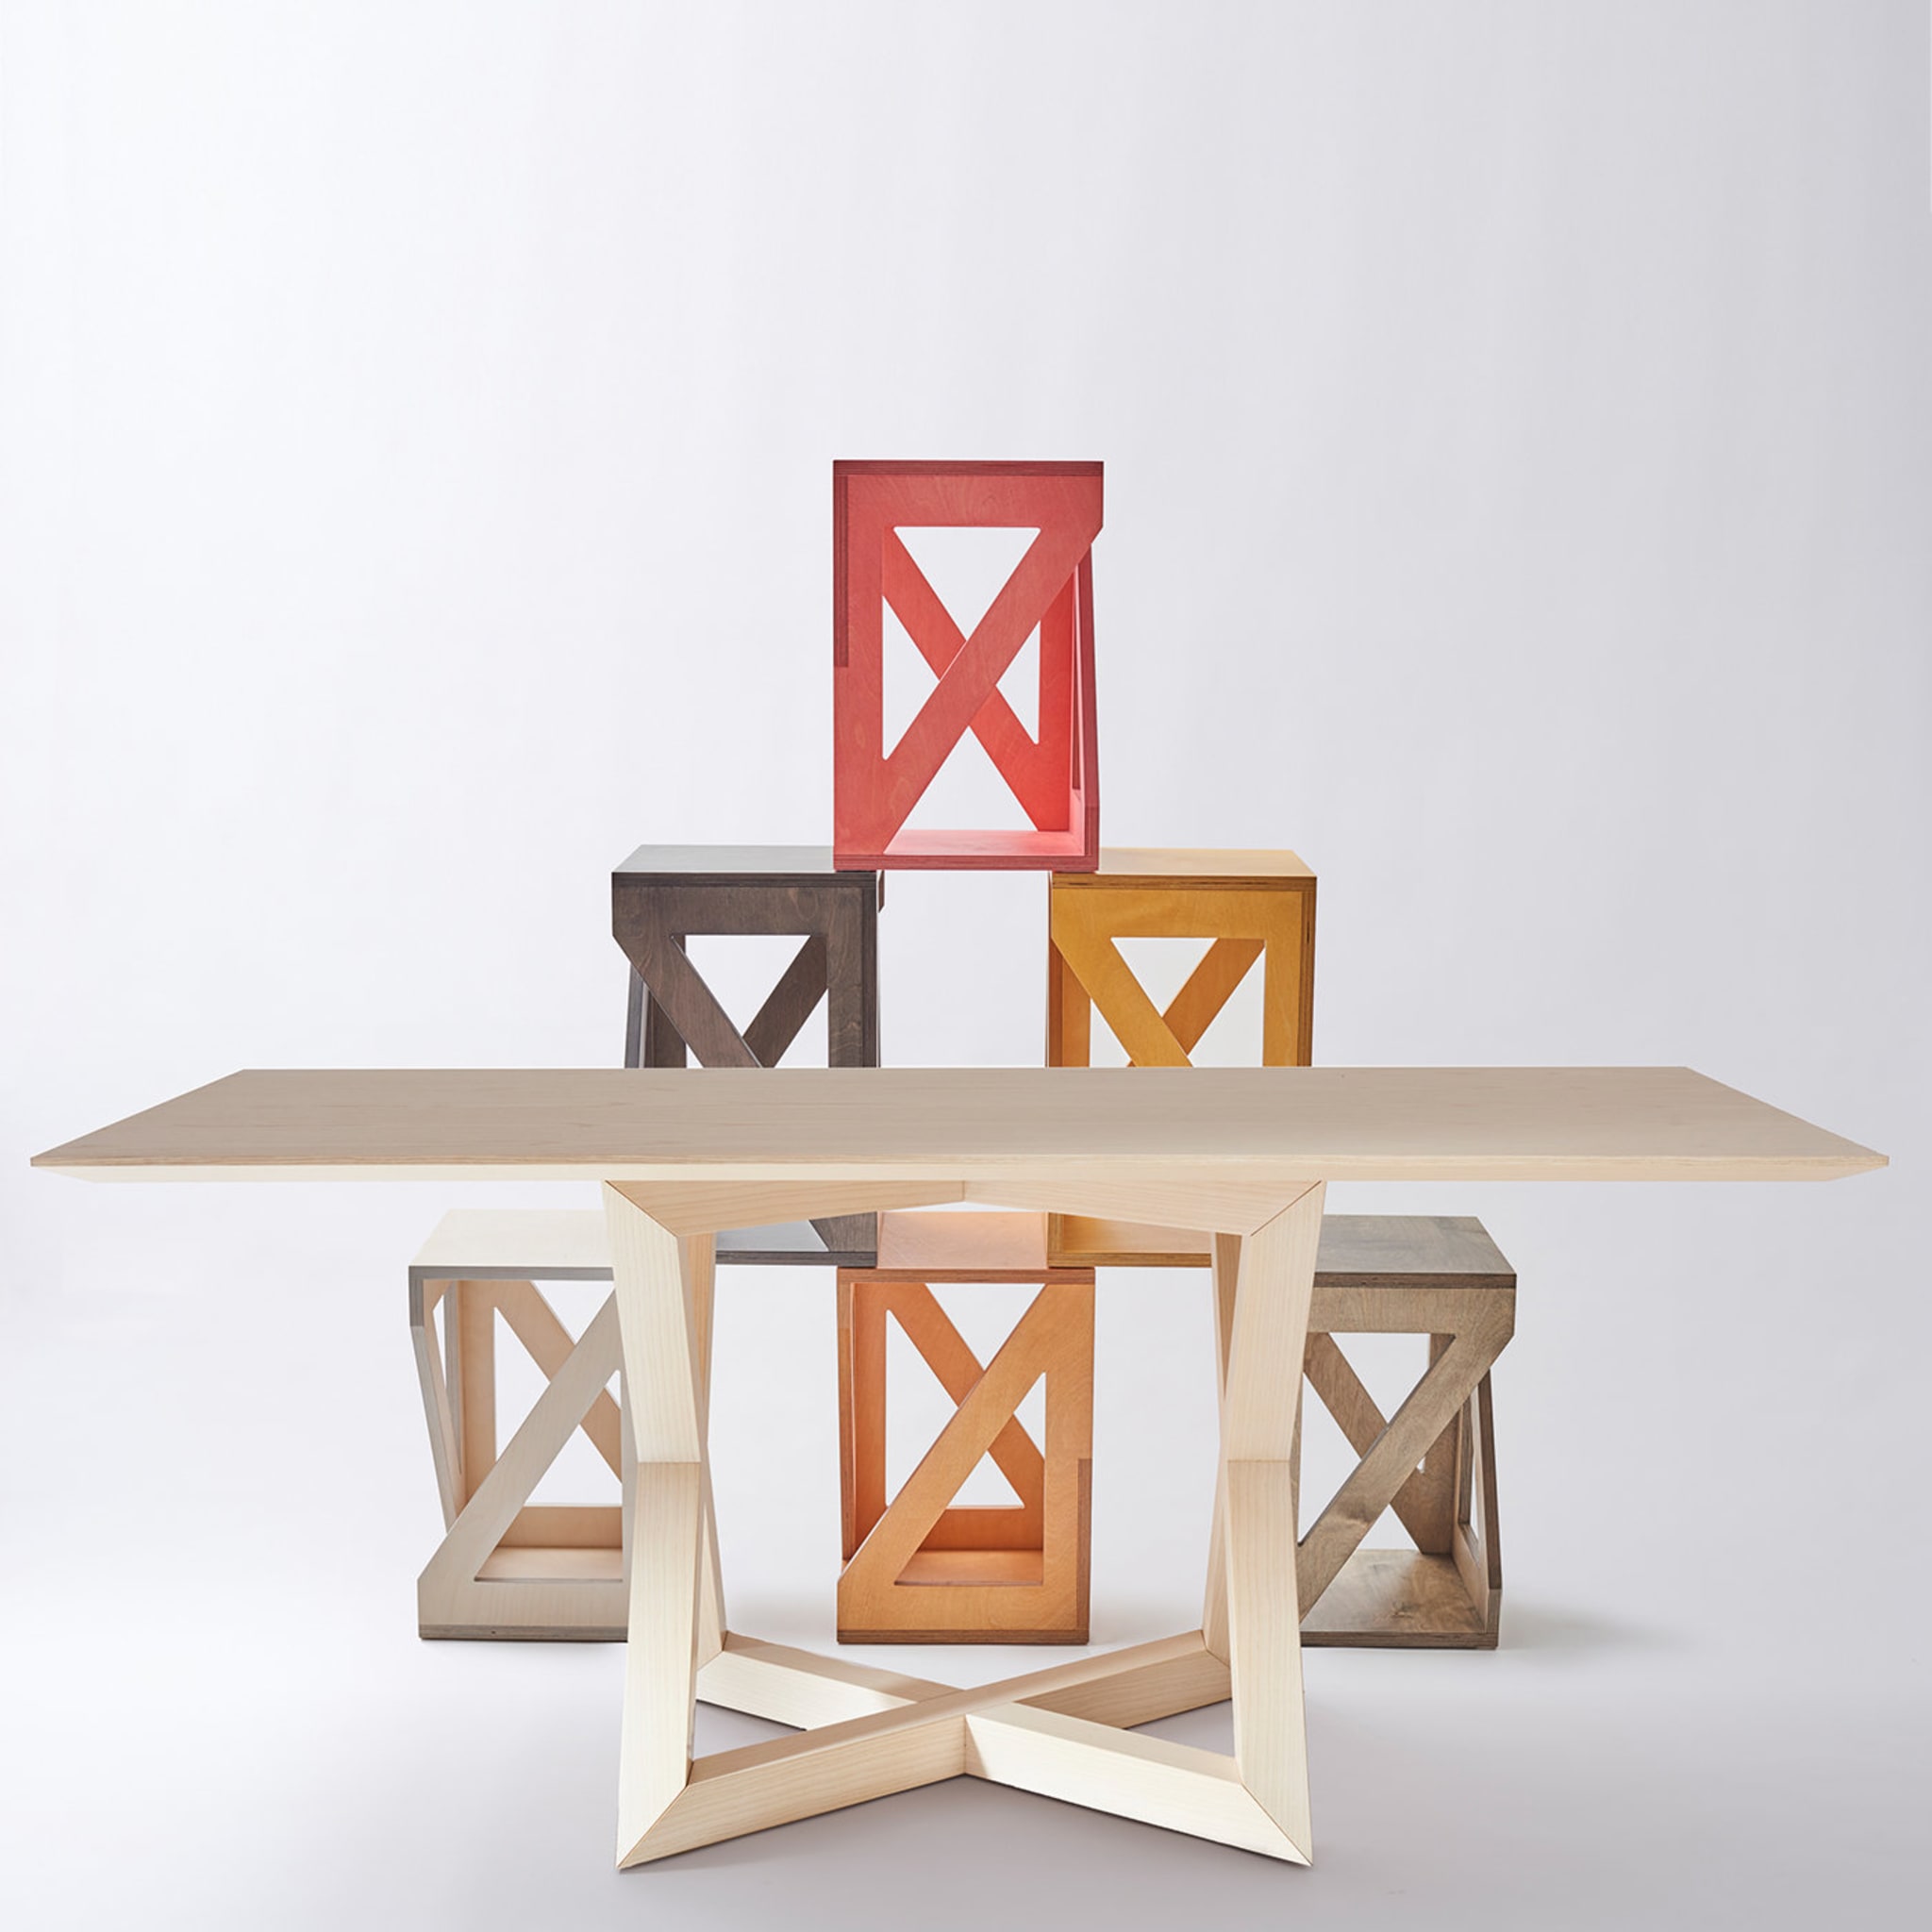 RK Wooden Dining Table by Antonio Saporito - Alternative view 3